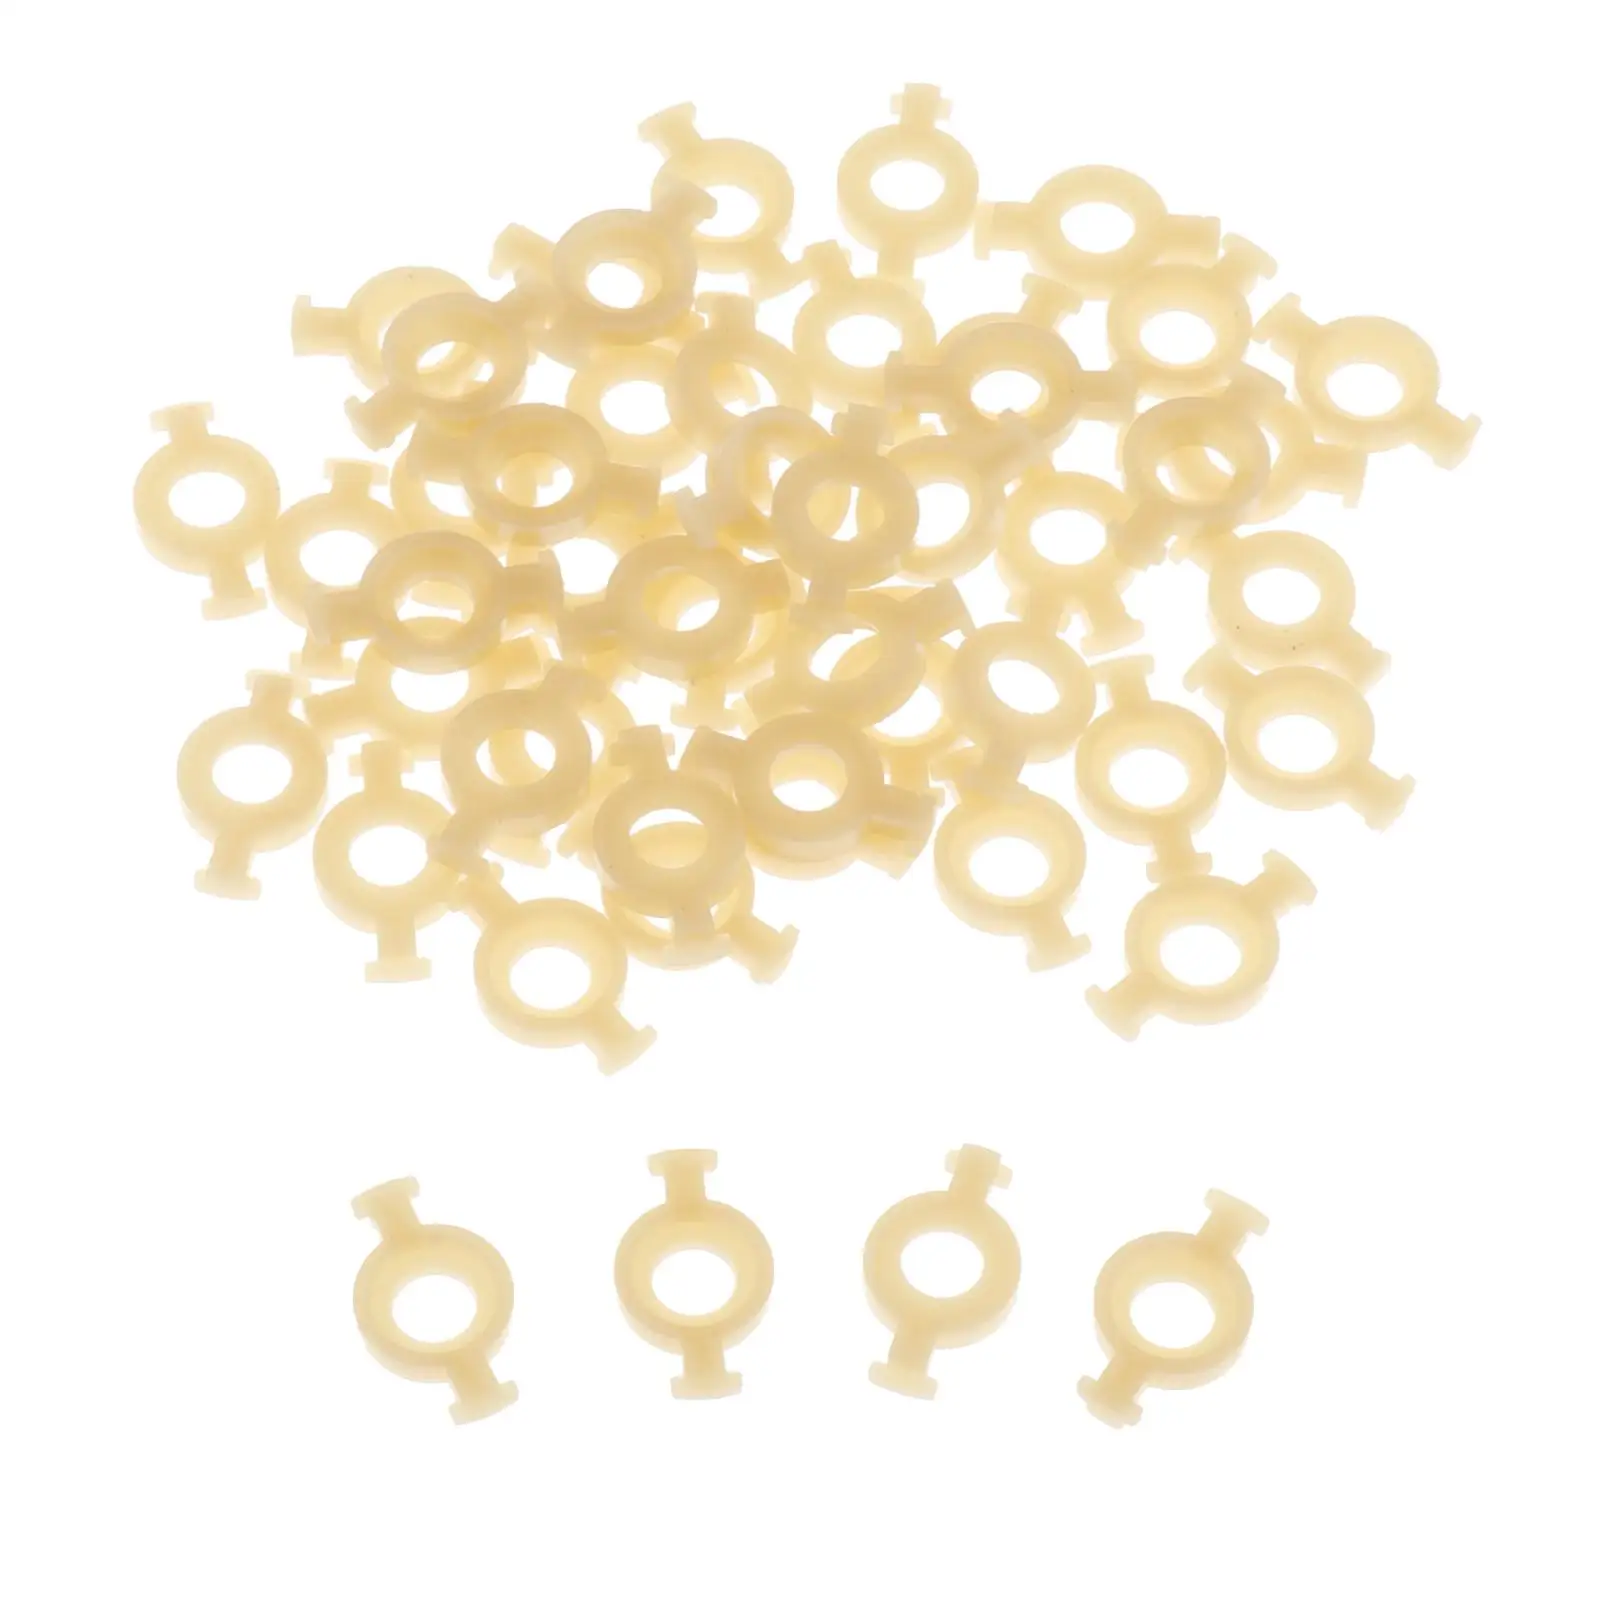 50x Plastic Trumpet Valve Guides Holder for Replacement Parts Accessories